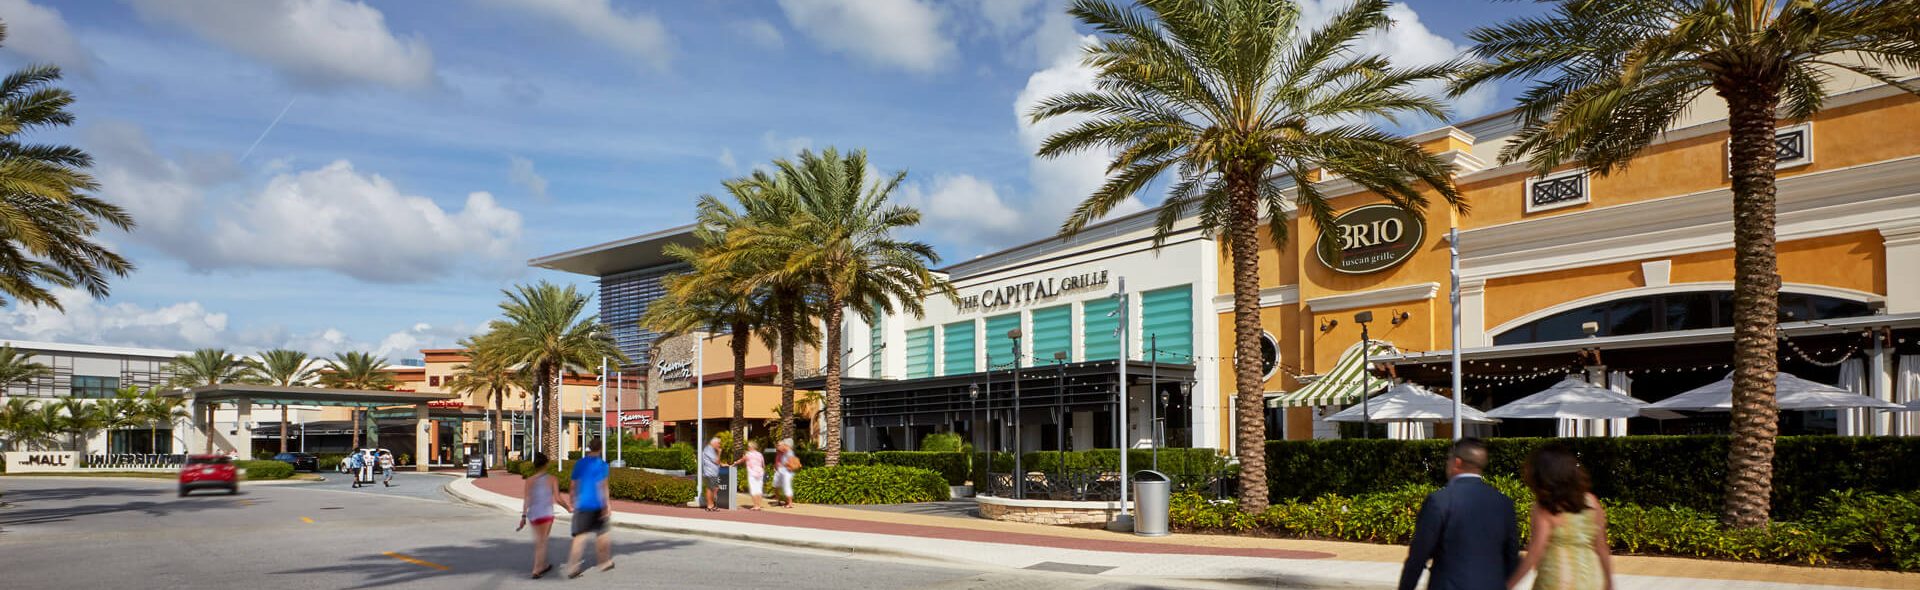 The Mall at University Town Center, Stores